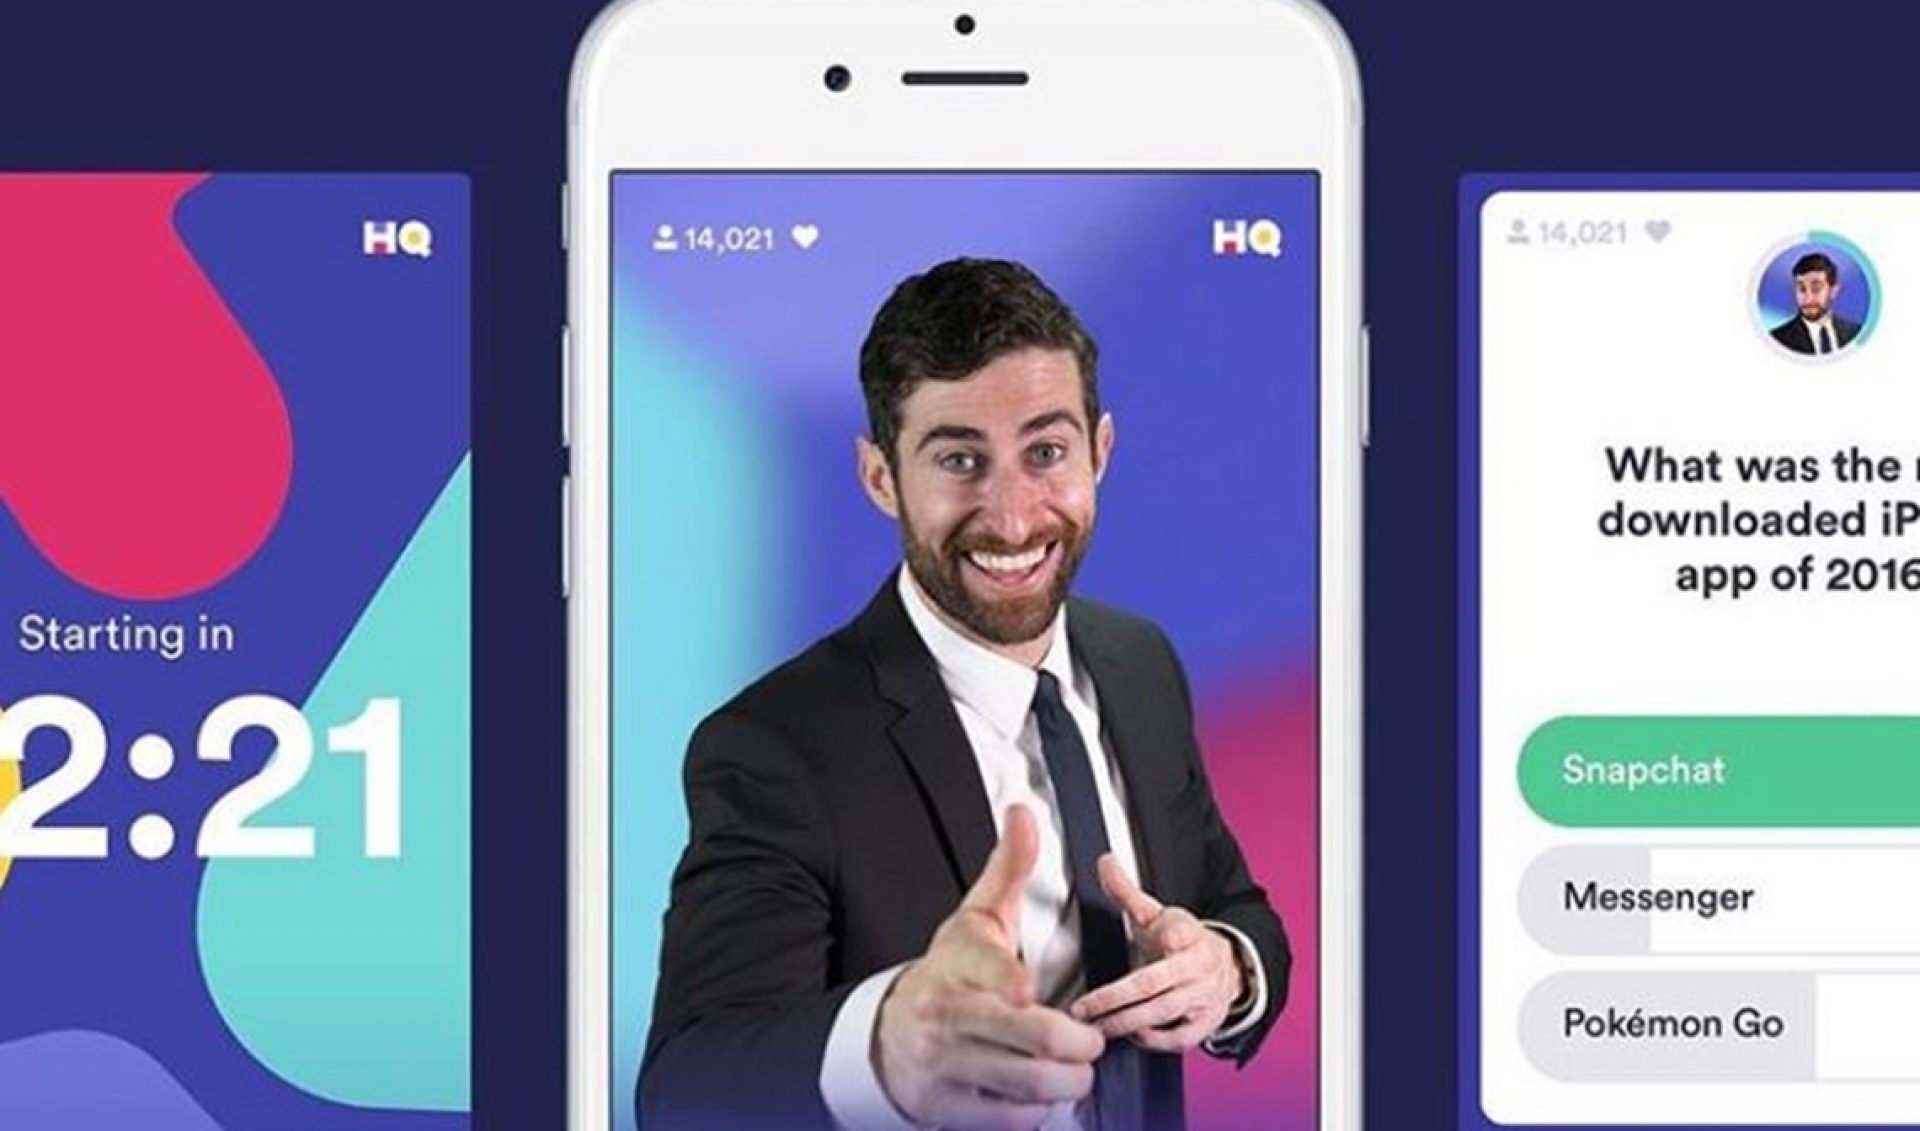 HQ Trivia Is Bleeding Users, Weathering CEO Drama Ahead Of Follow-Up Game Launch (Report)